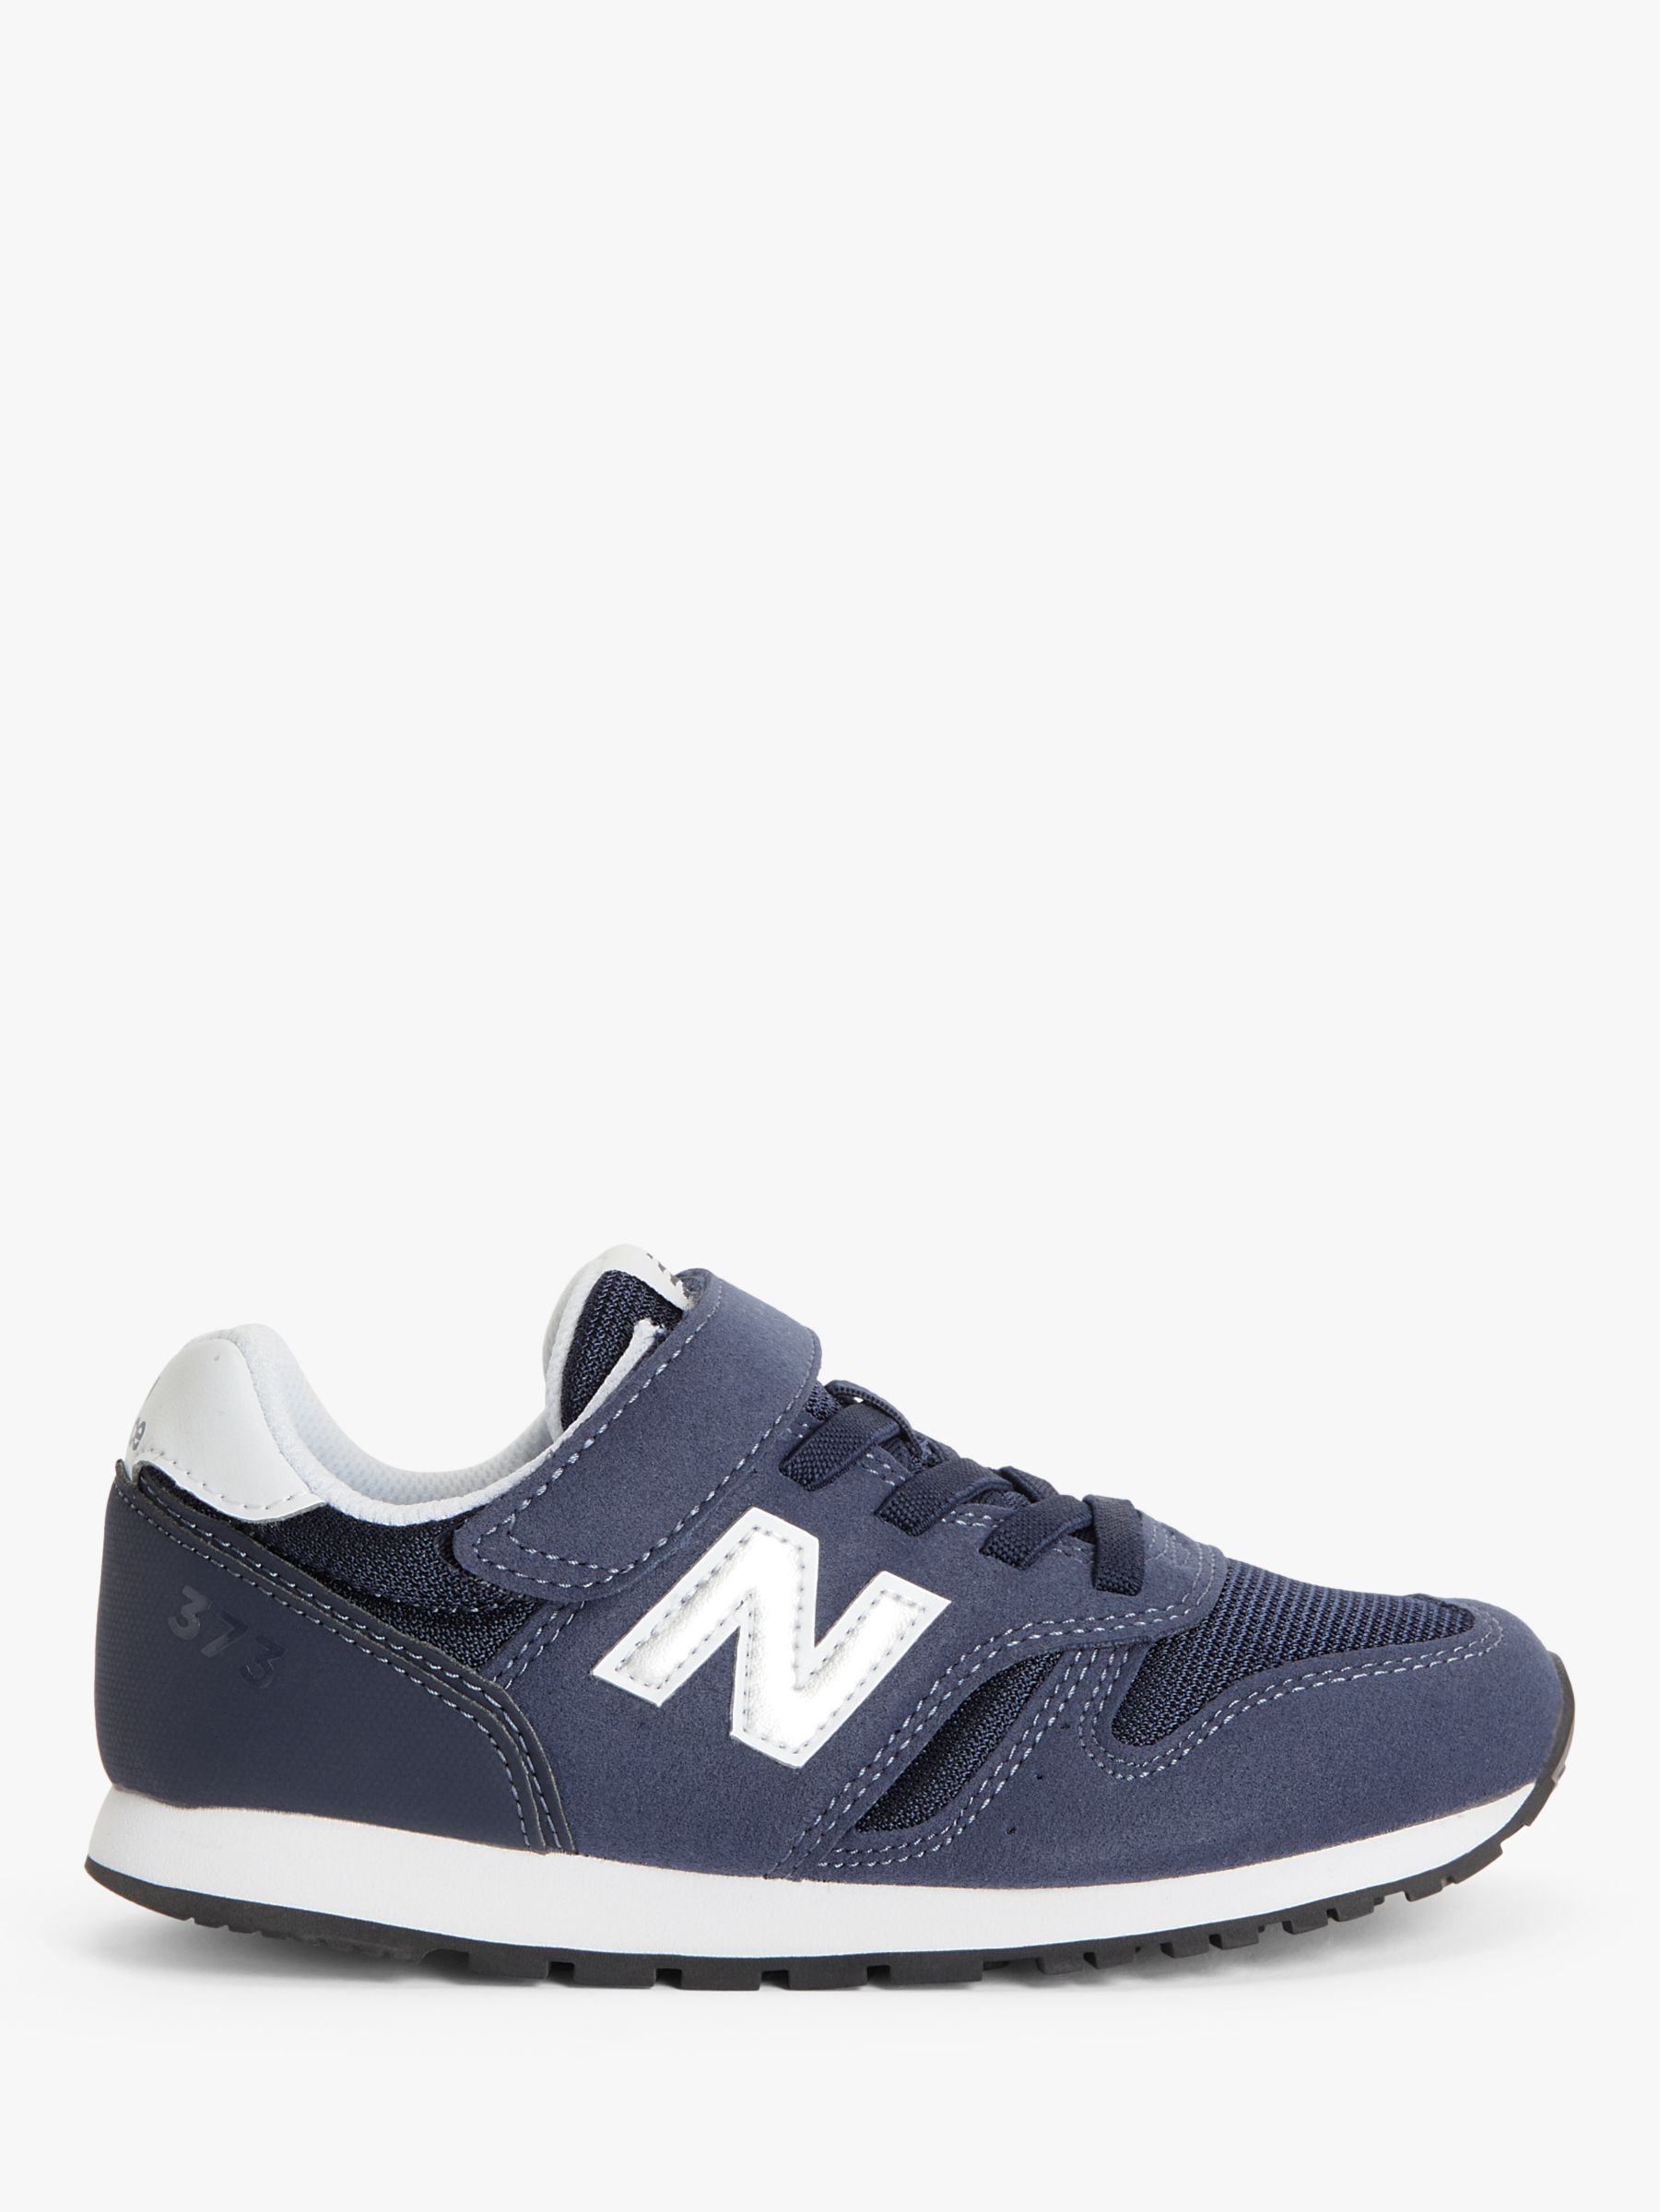 New Balance Kids' 373 Bungee Lace with Velcro Top Strap Trainers, Natural Indigo, 12 Jnr